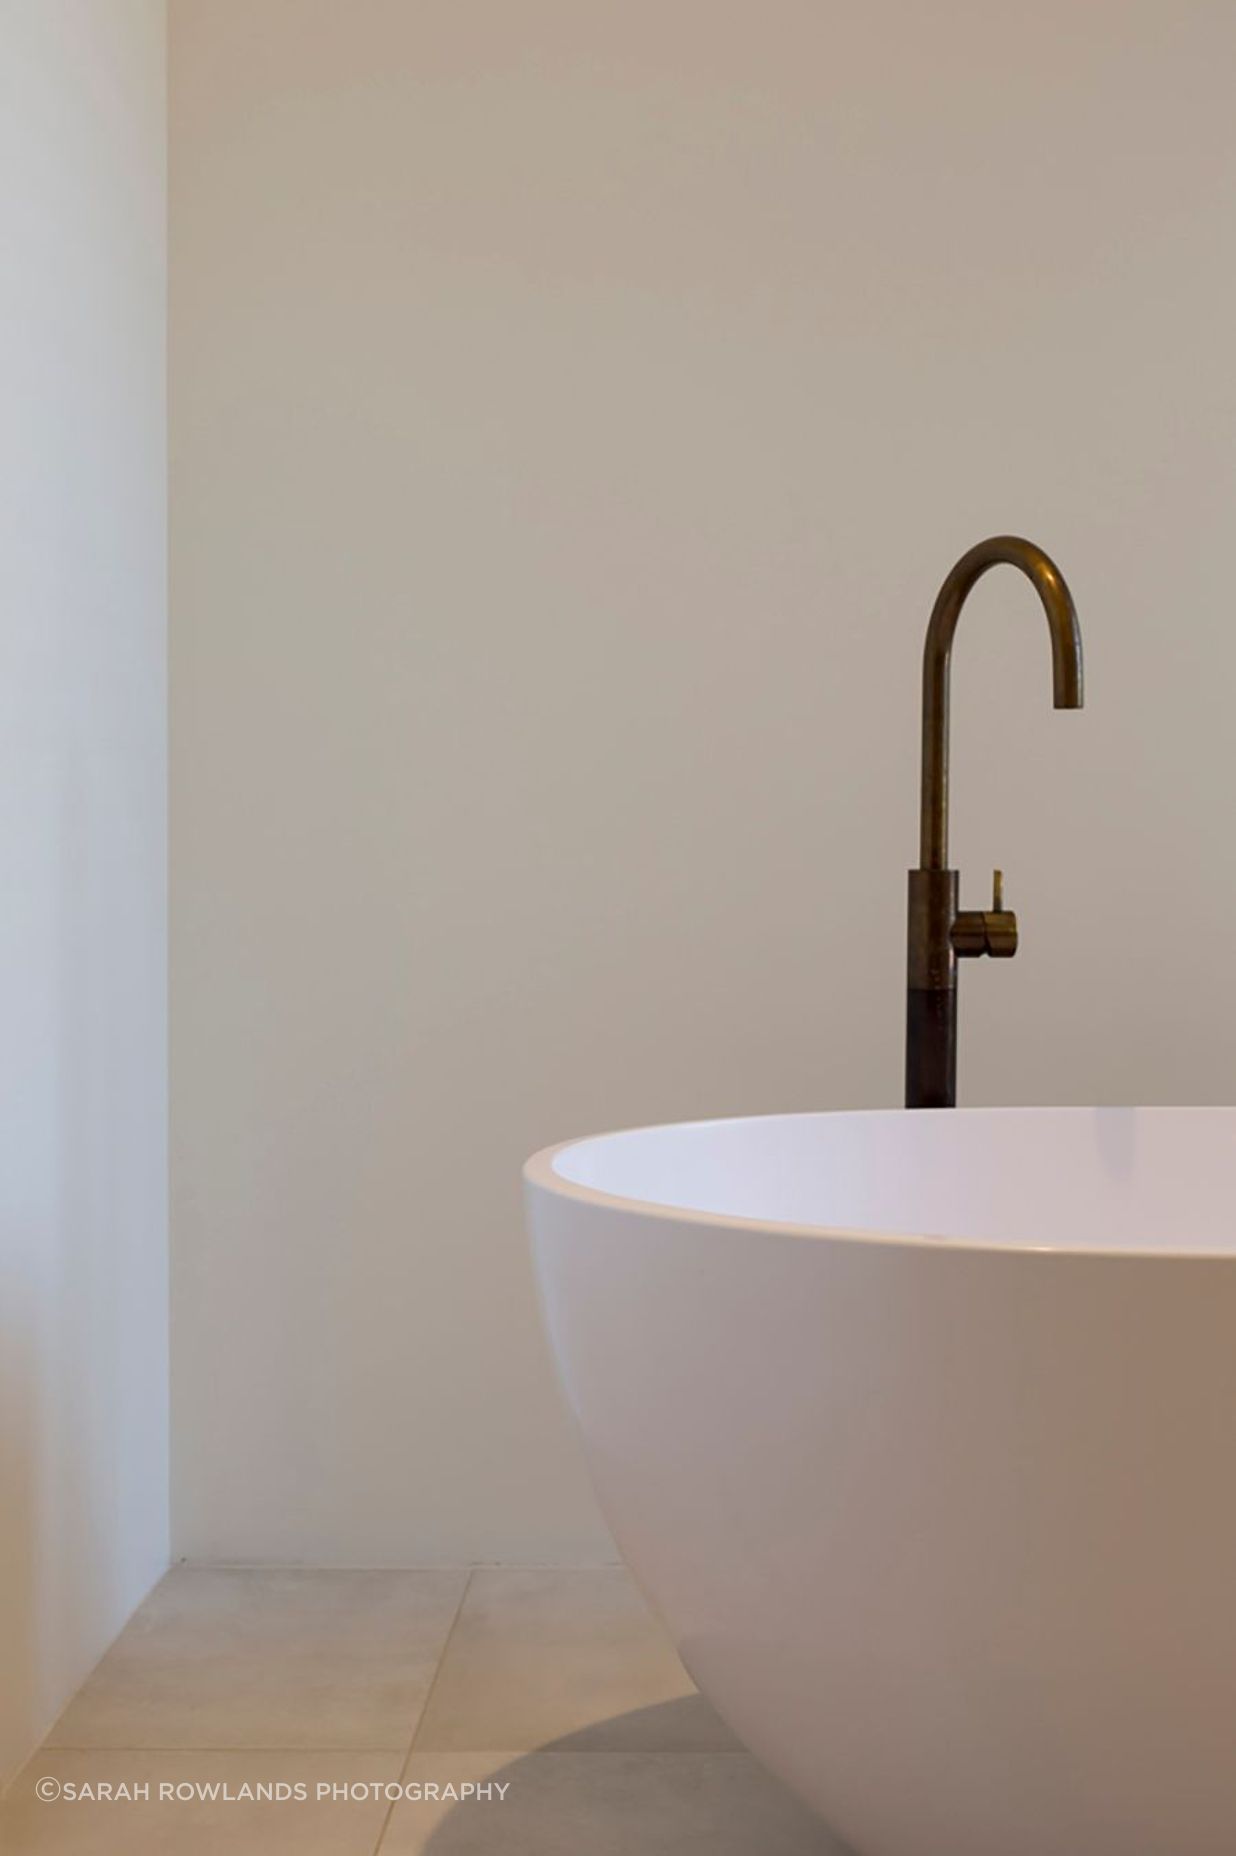 The 'Egg' freestanding bath with brass tapware from Plumline.